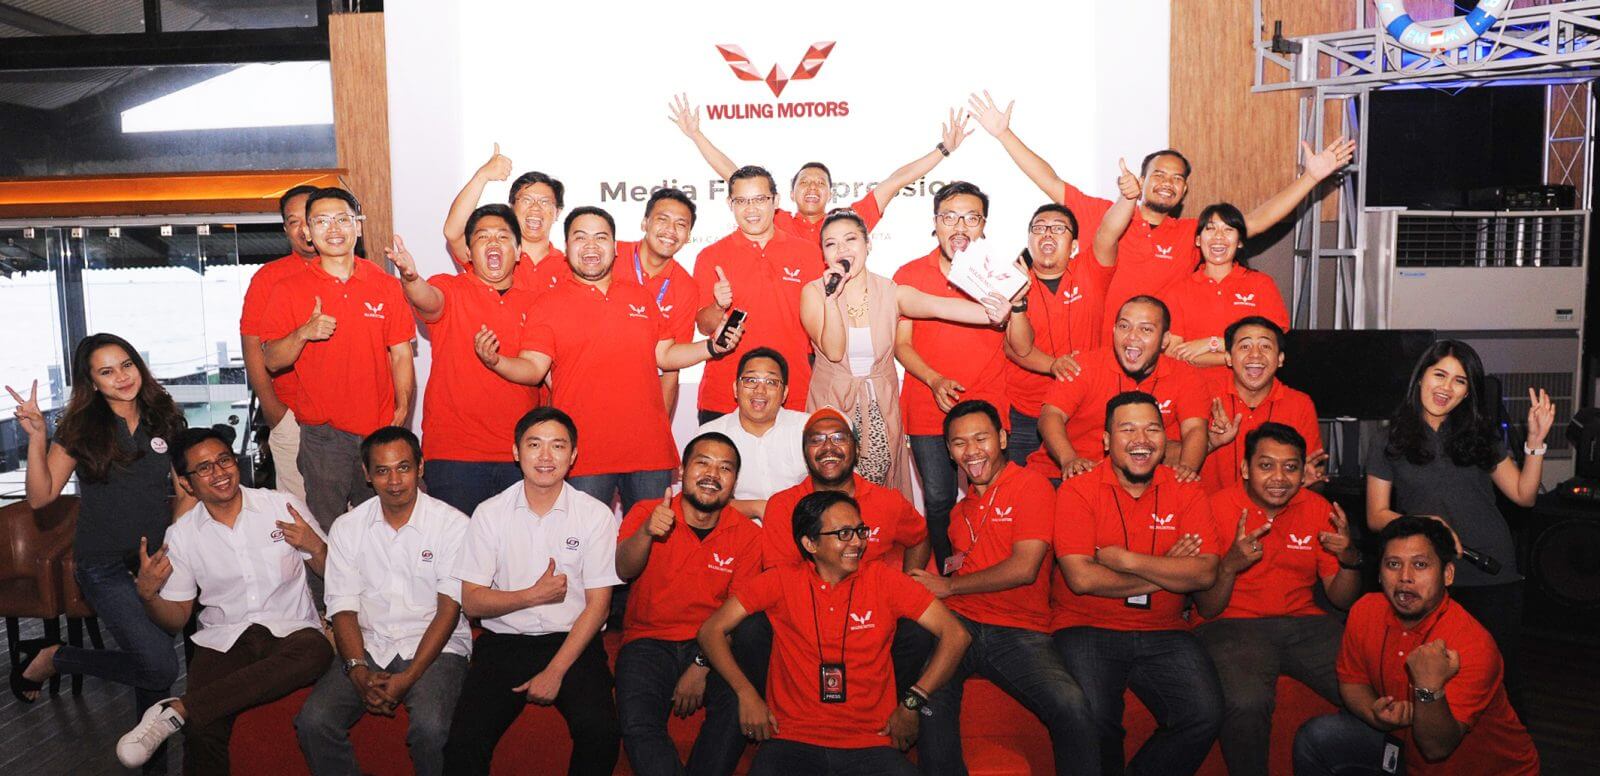 Image Wuling Motors Showcase its First Product in Indonesia, Confero S, at Media First Impression Event